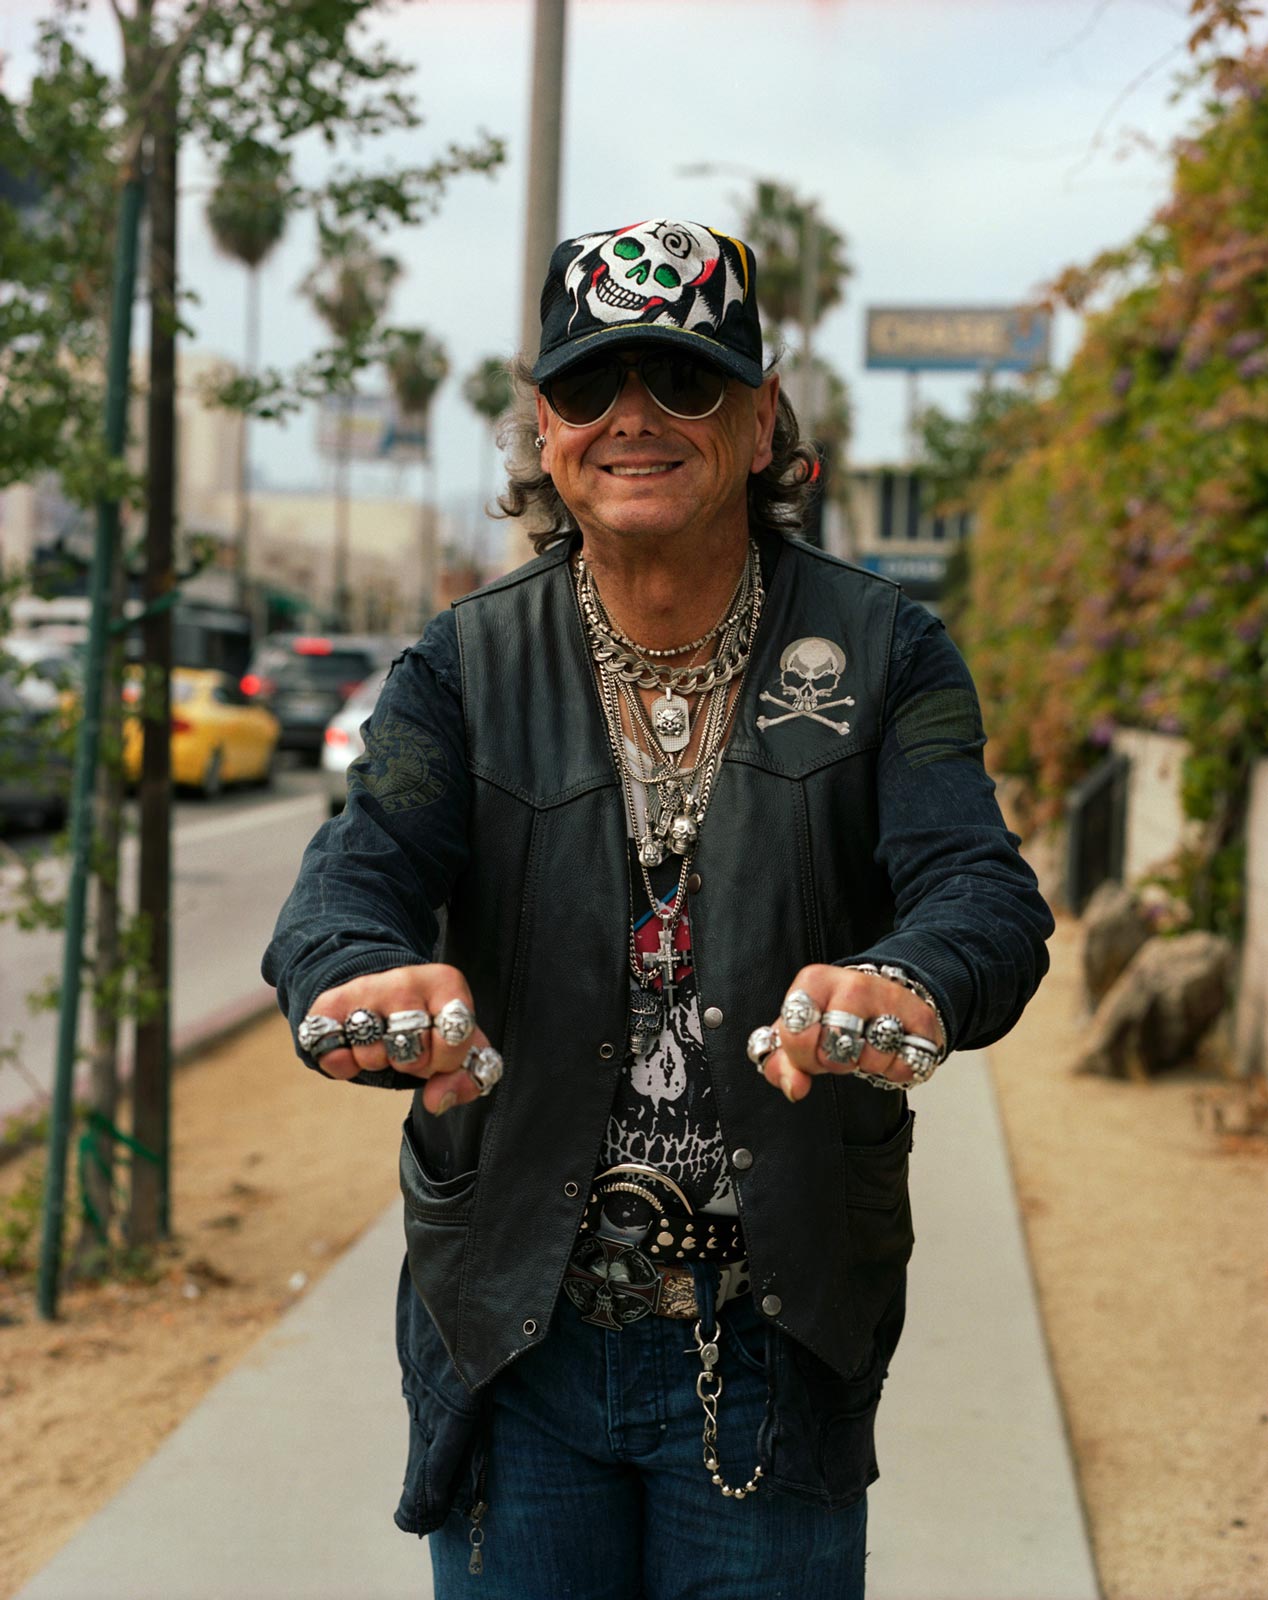 Sal and his many rings, outside CBS Studios downtown LA.